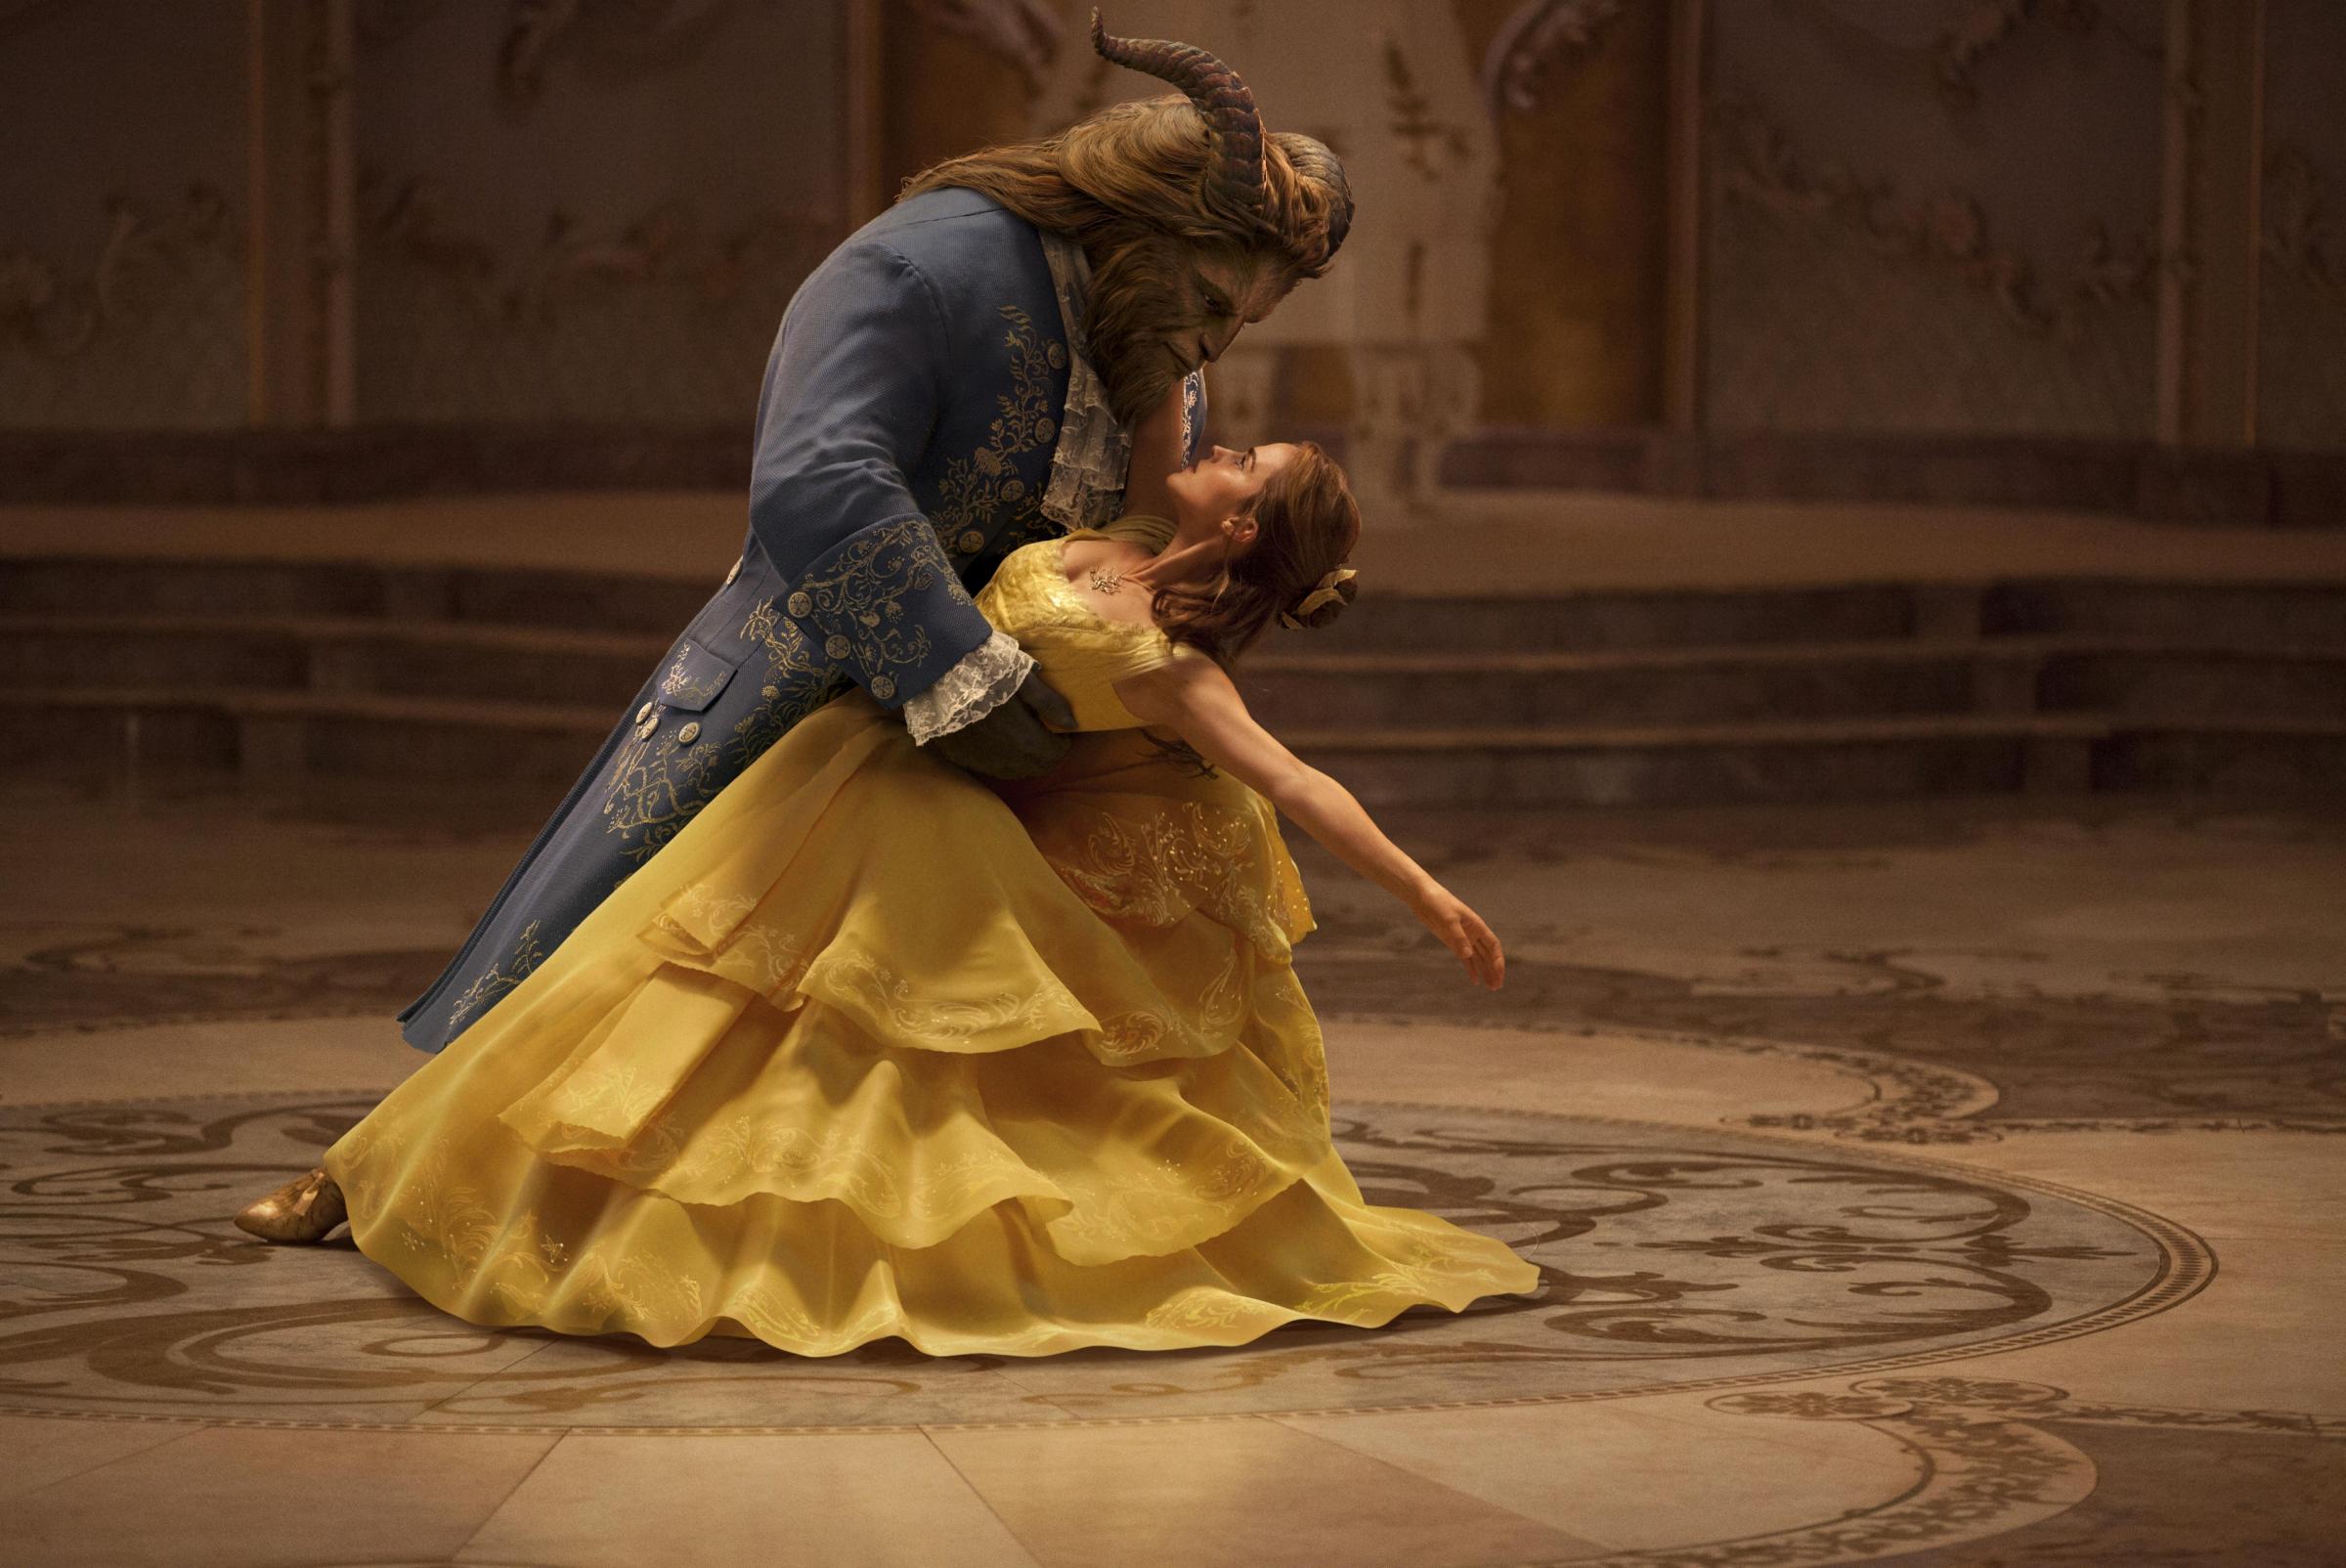 Beauty And The Beast in top 20 biggest films ever at UK box office